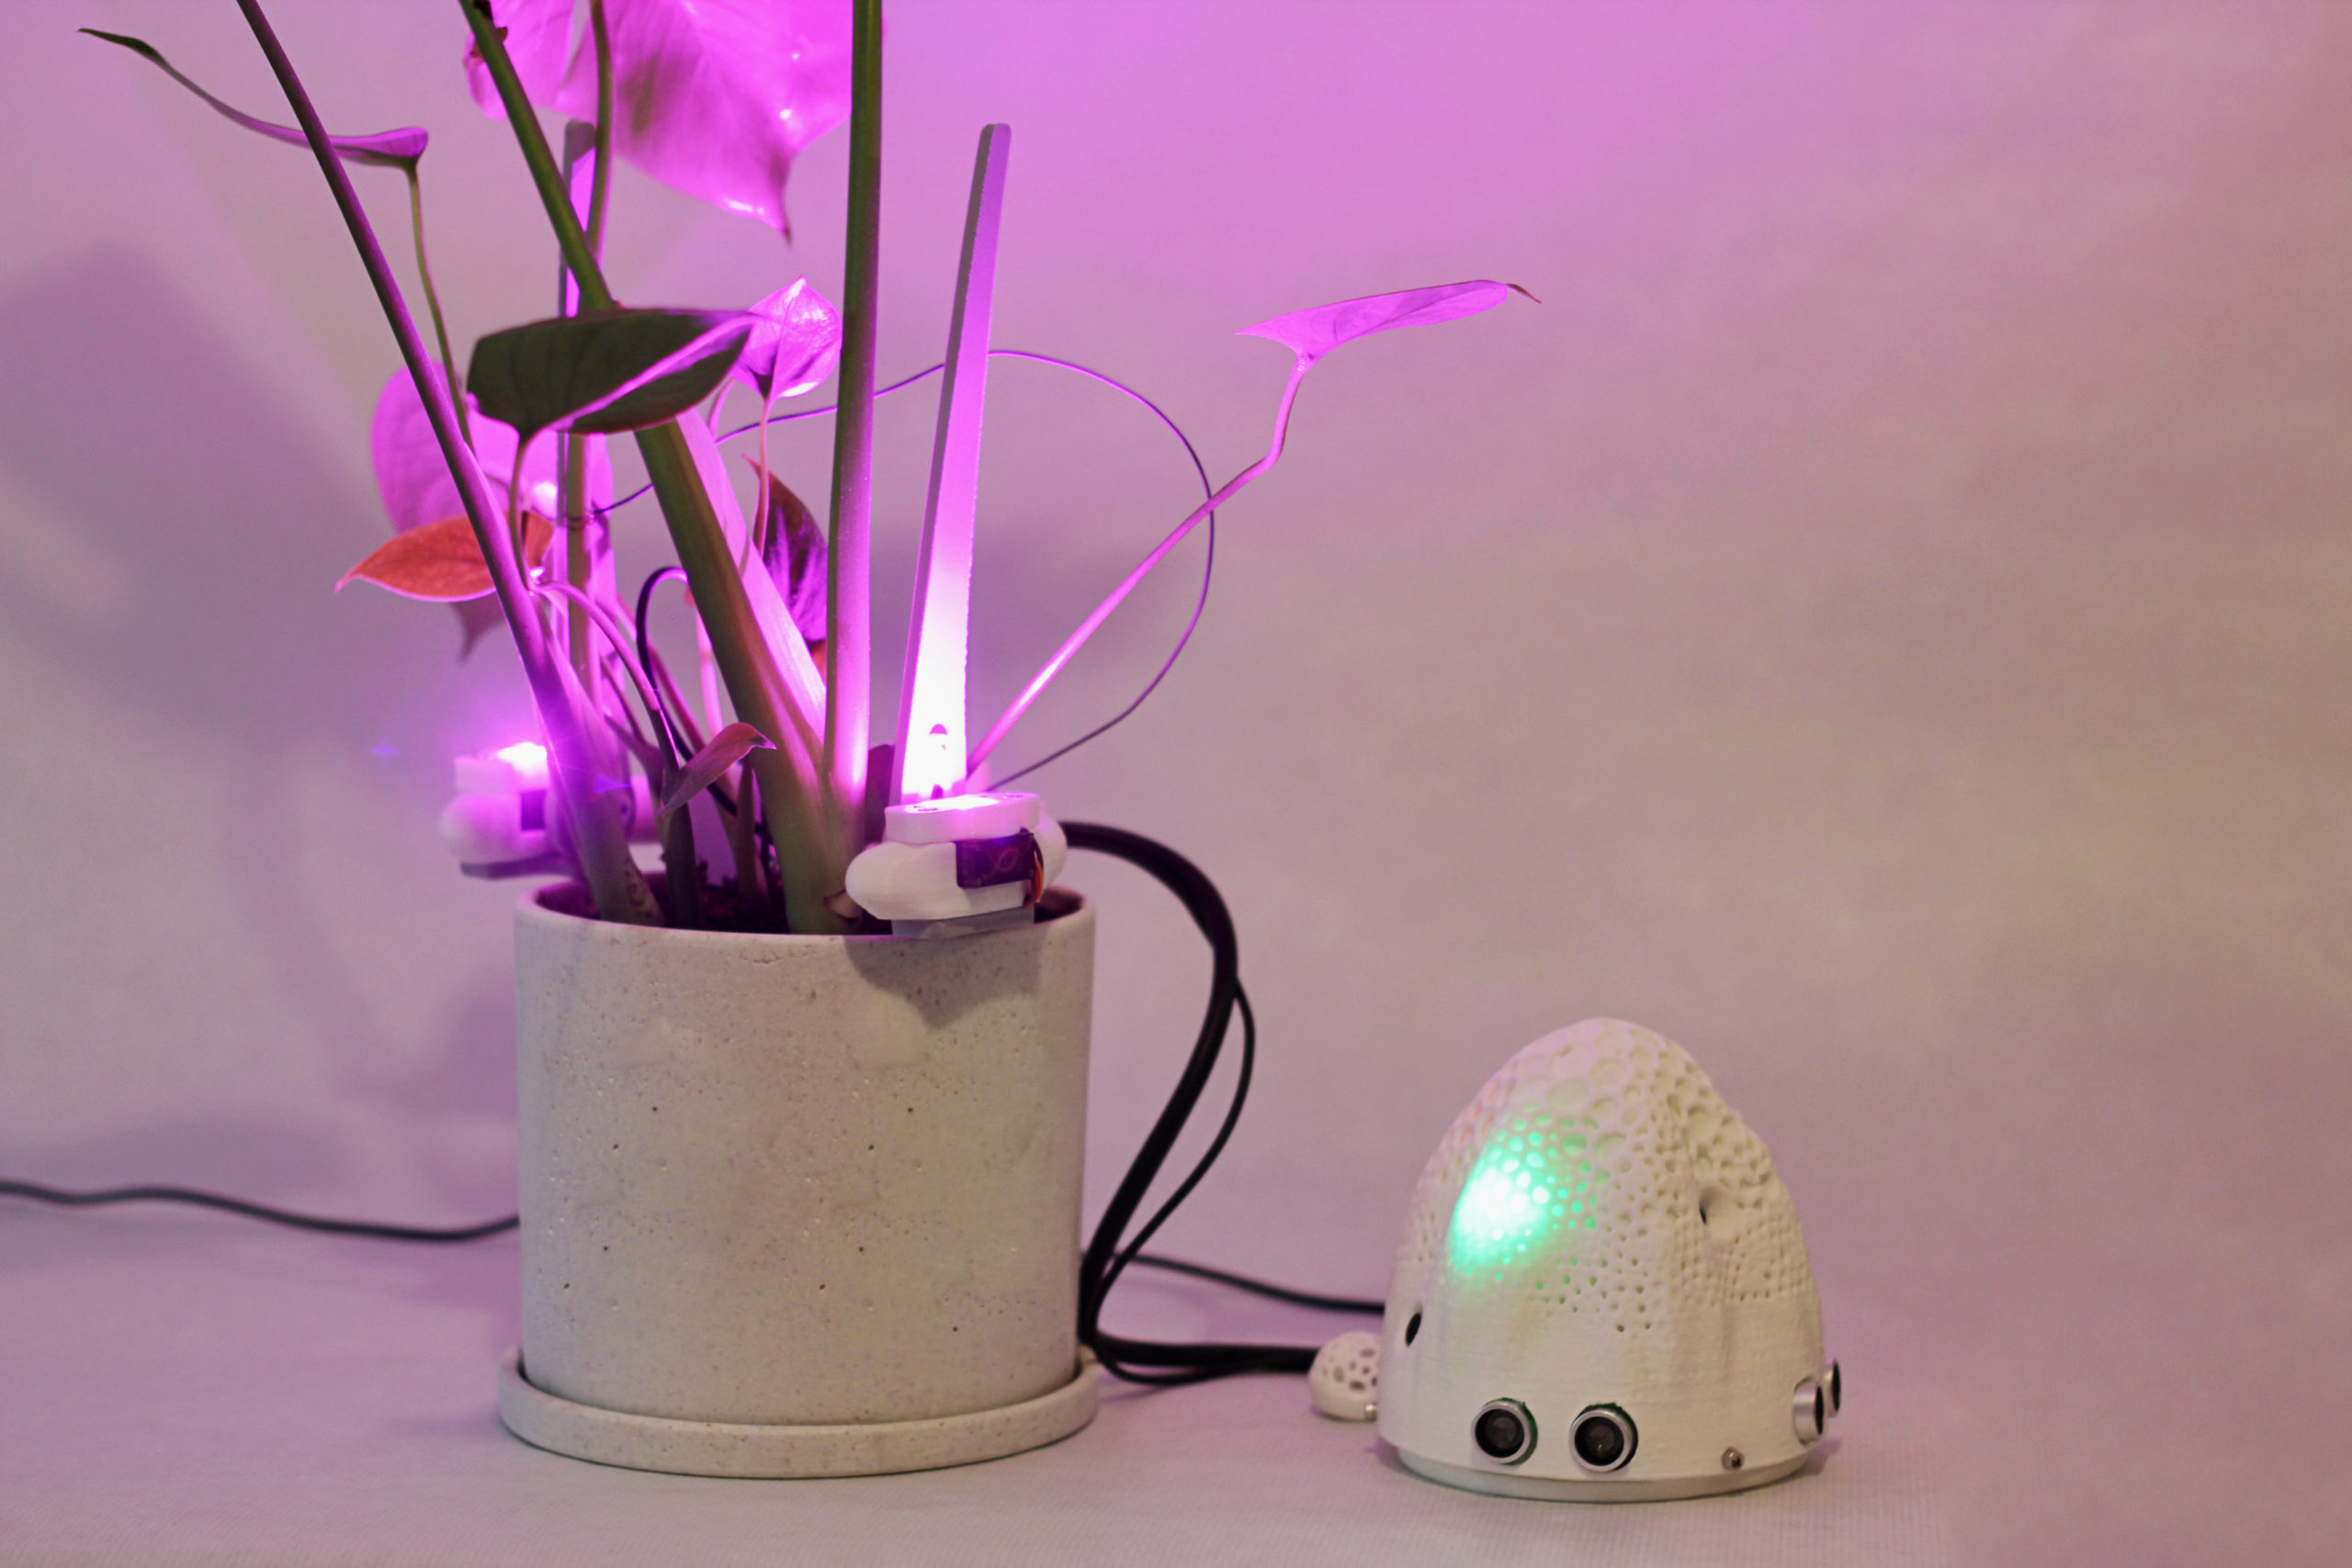 A sensor and plant working together, lit up in purple light